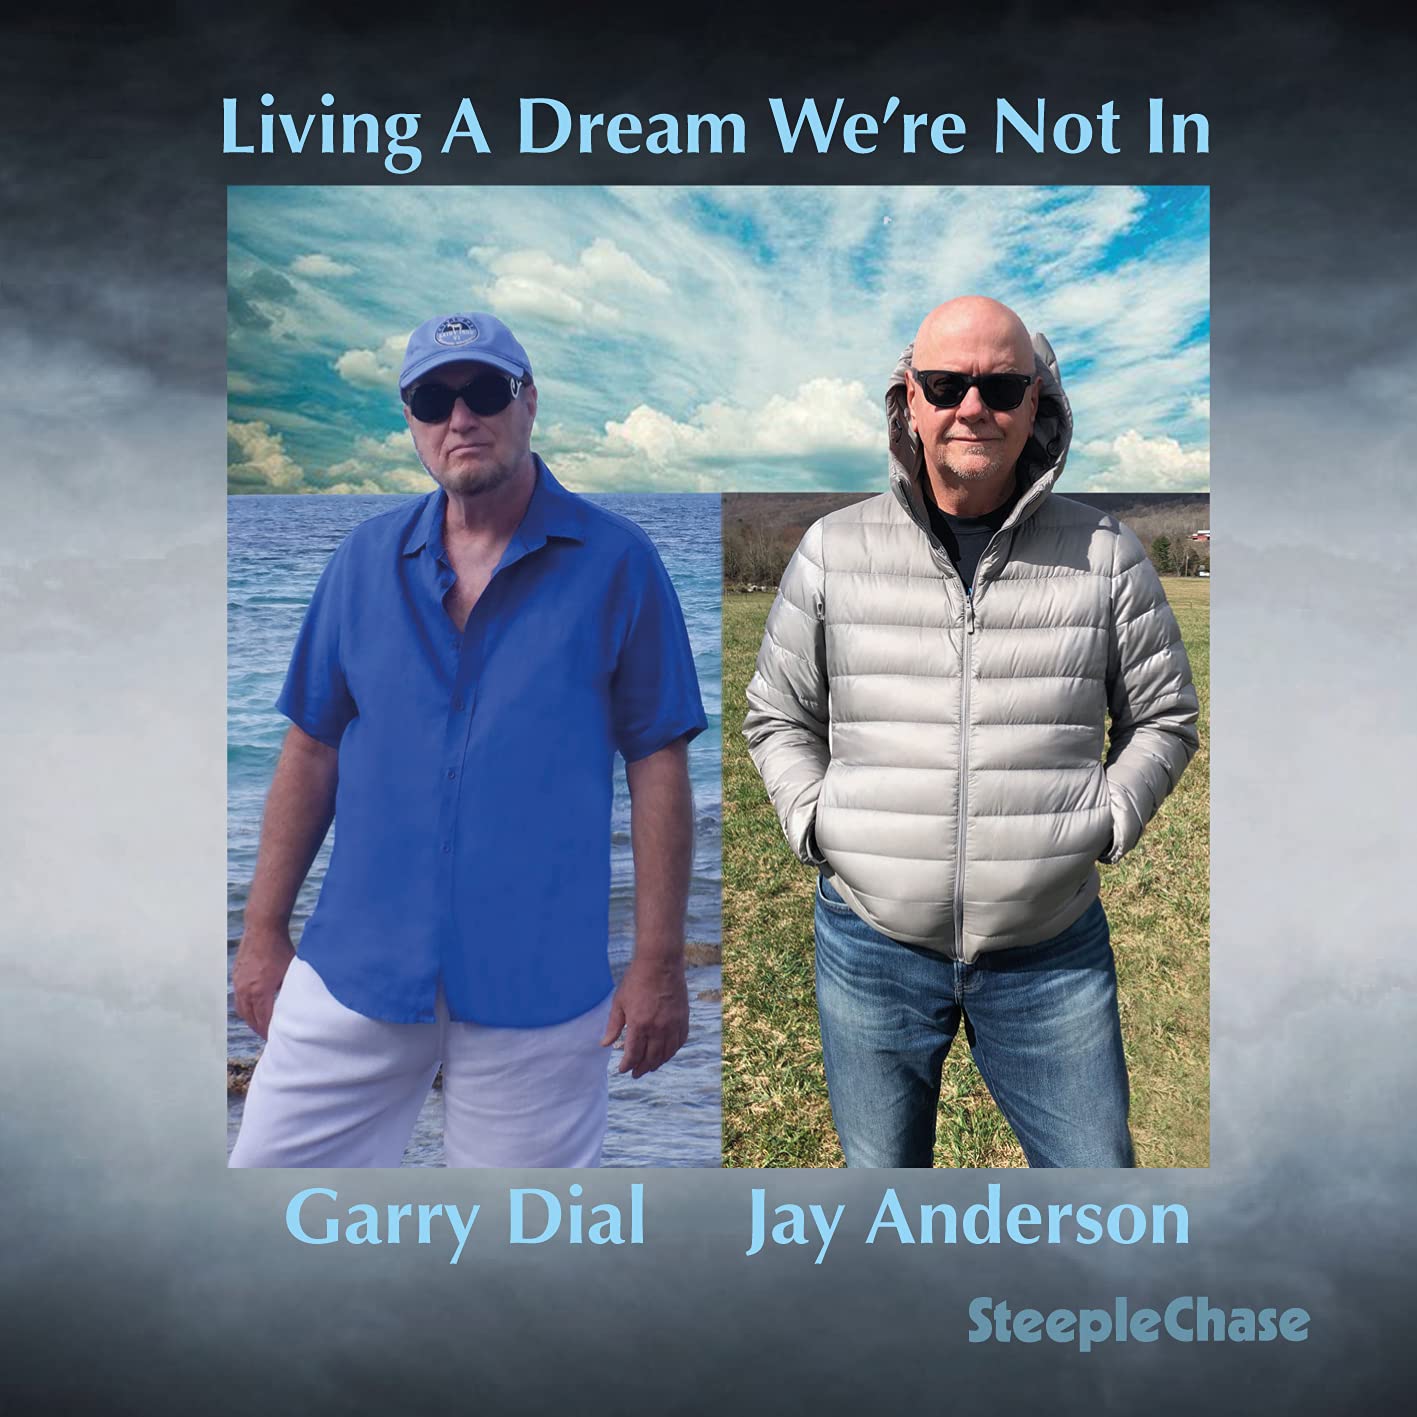 GARRY DIAL - Garry Dial - Jay Anderson : Living A Dream Were Not In cover 